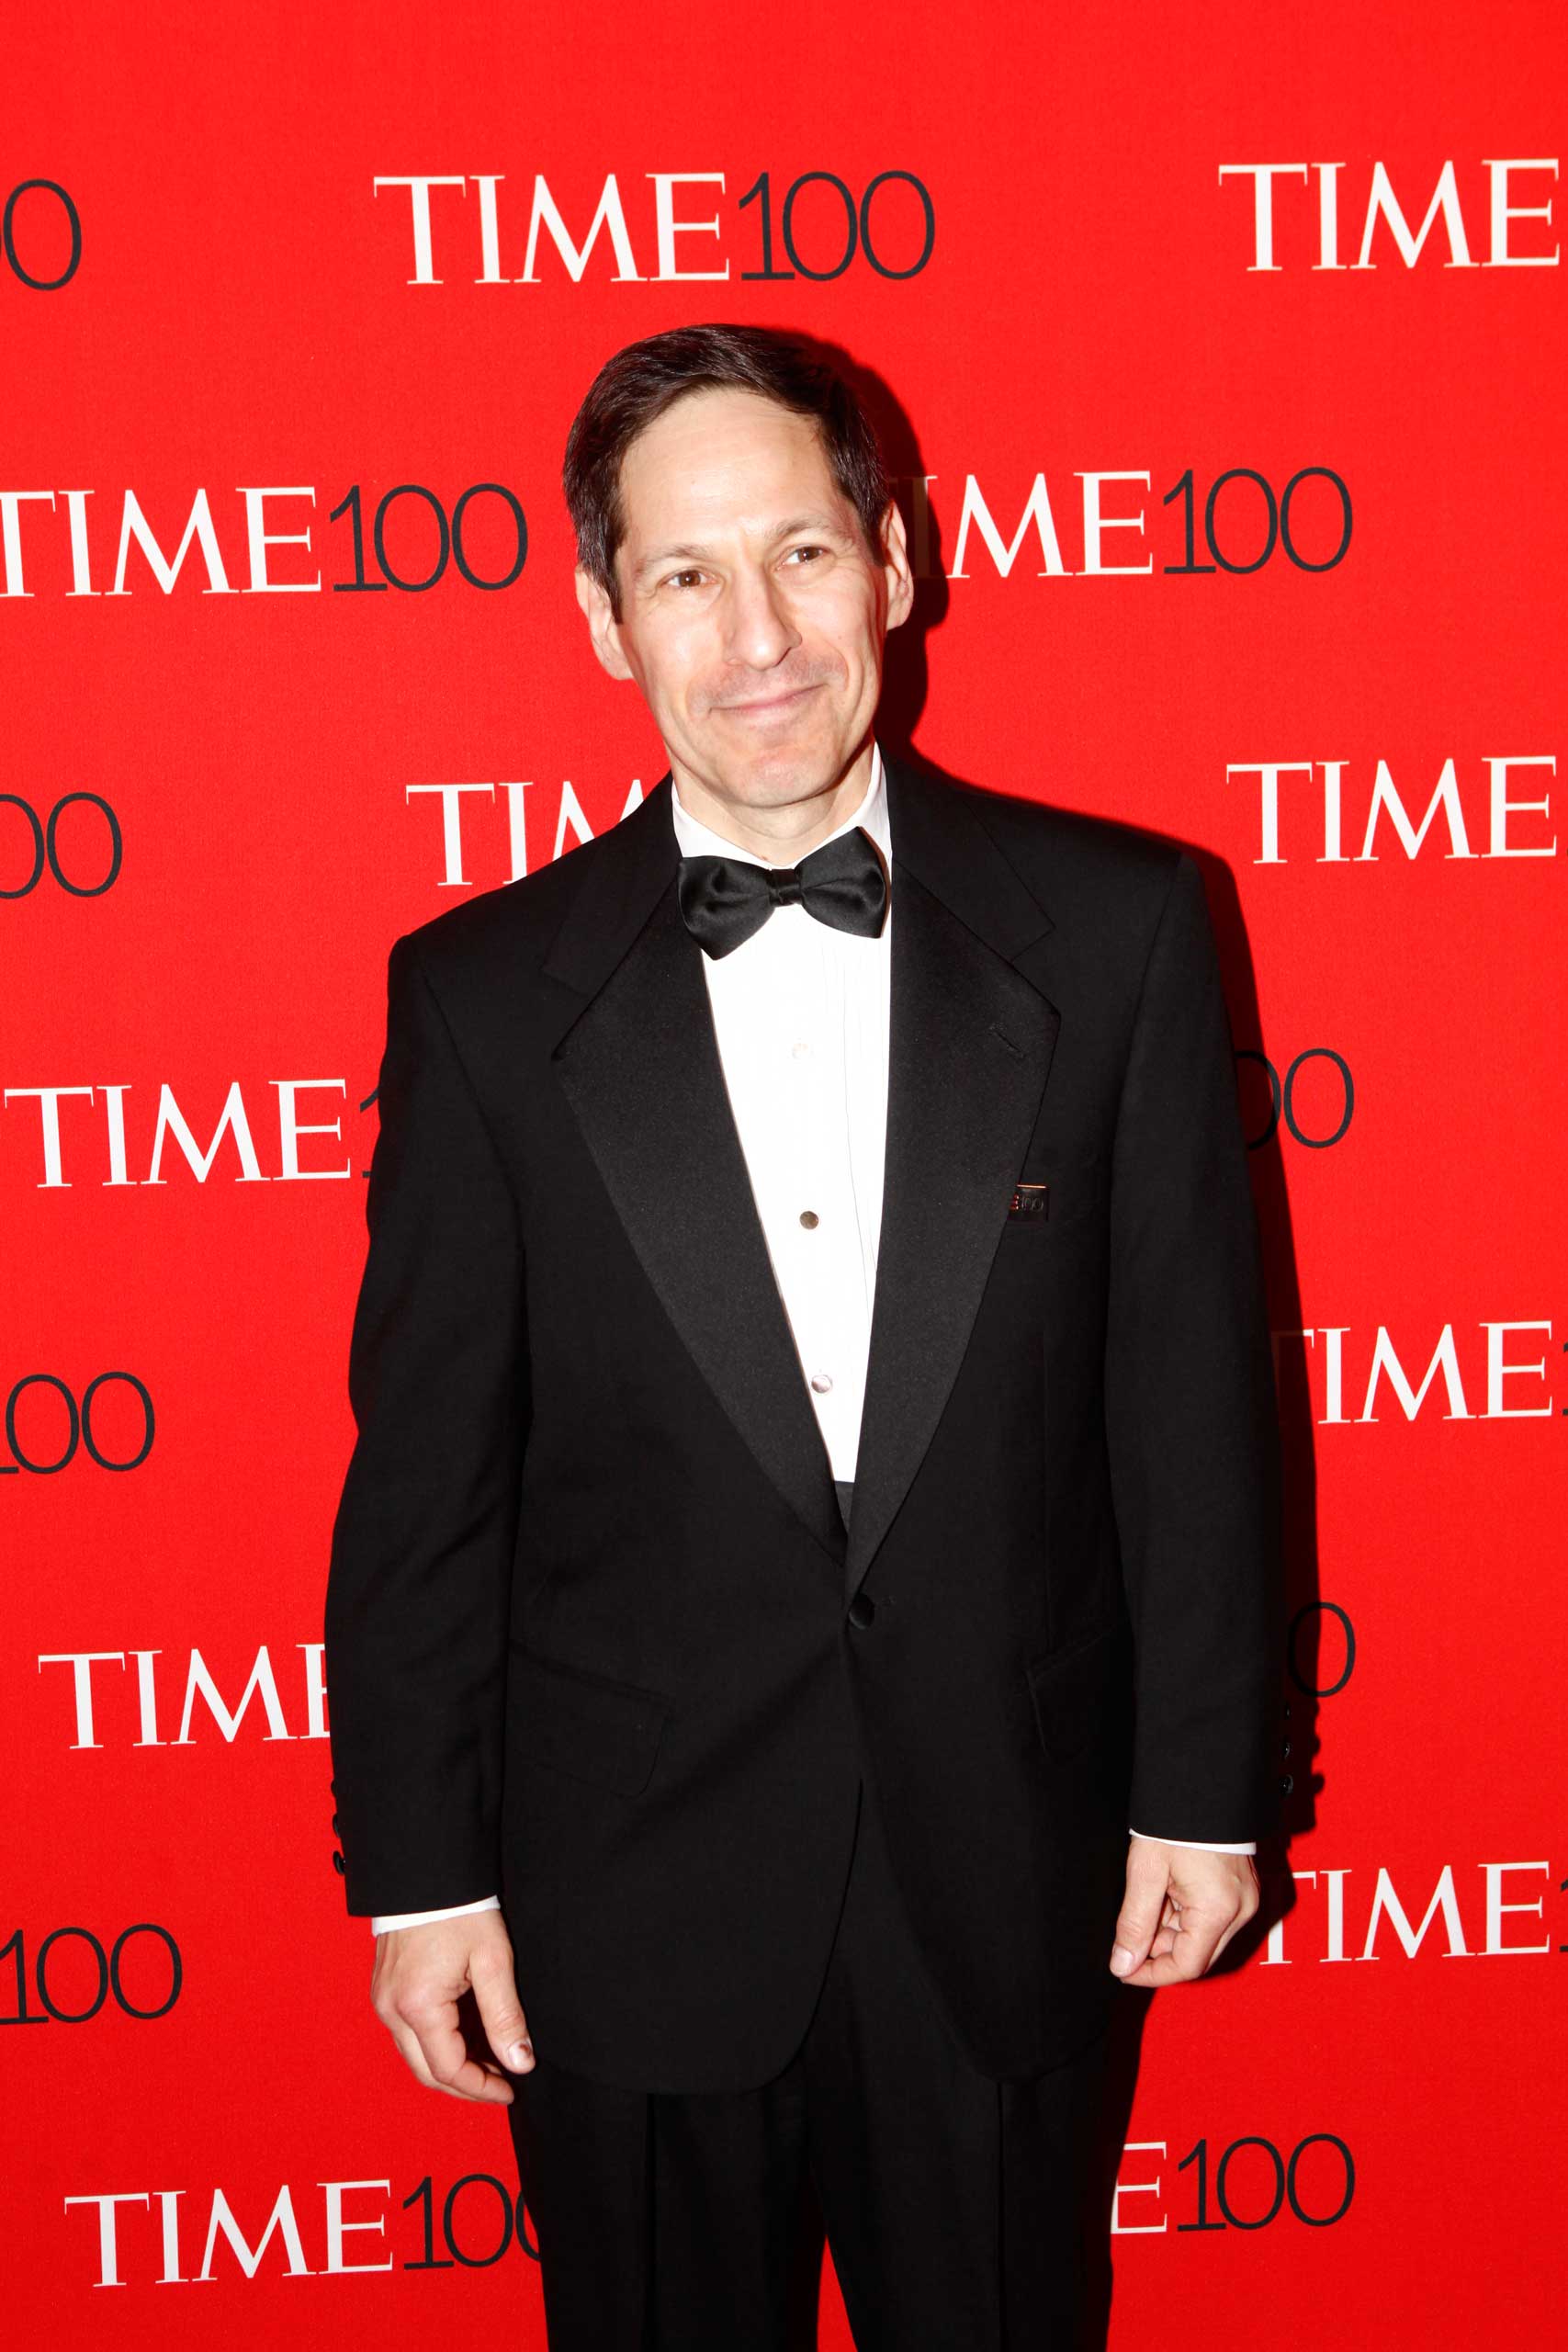 attends the TIME 100 Gala at Lincoln Center in New York, NY on Apr. 21, 2015.